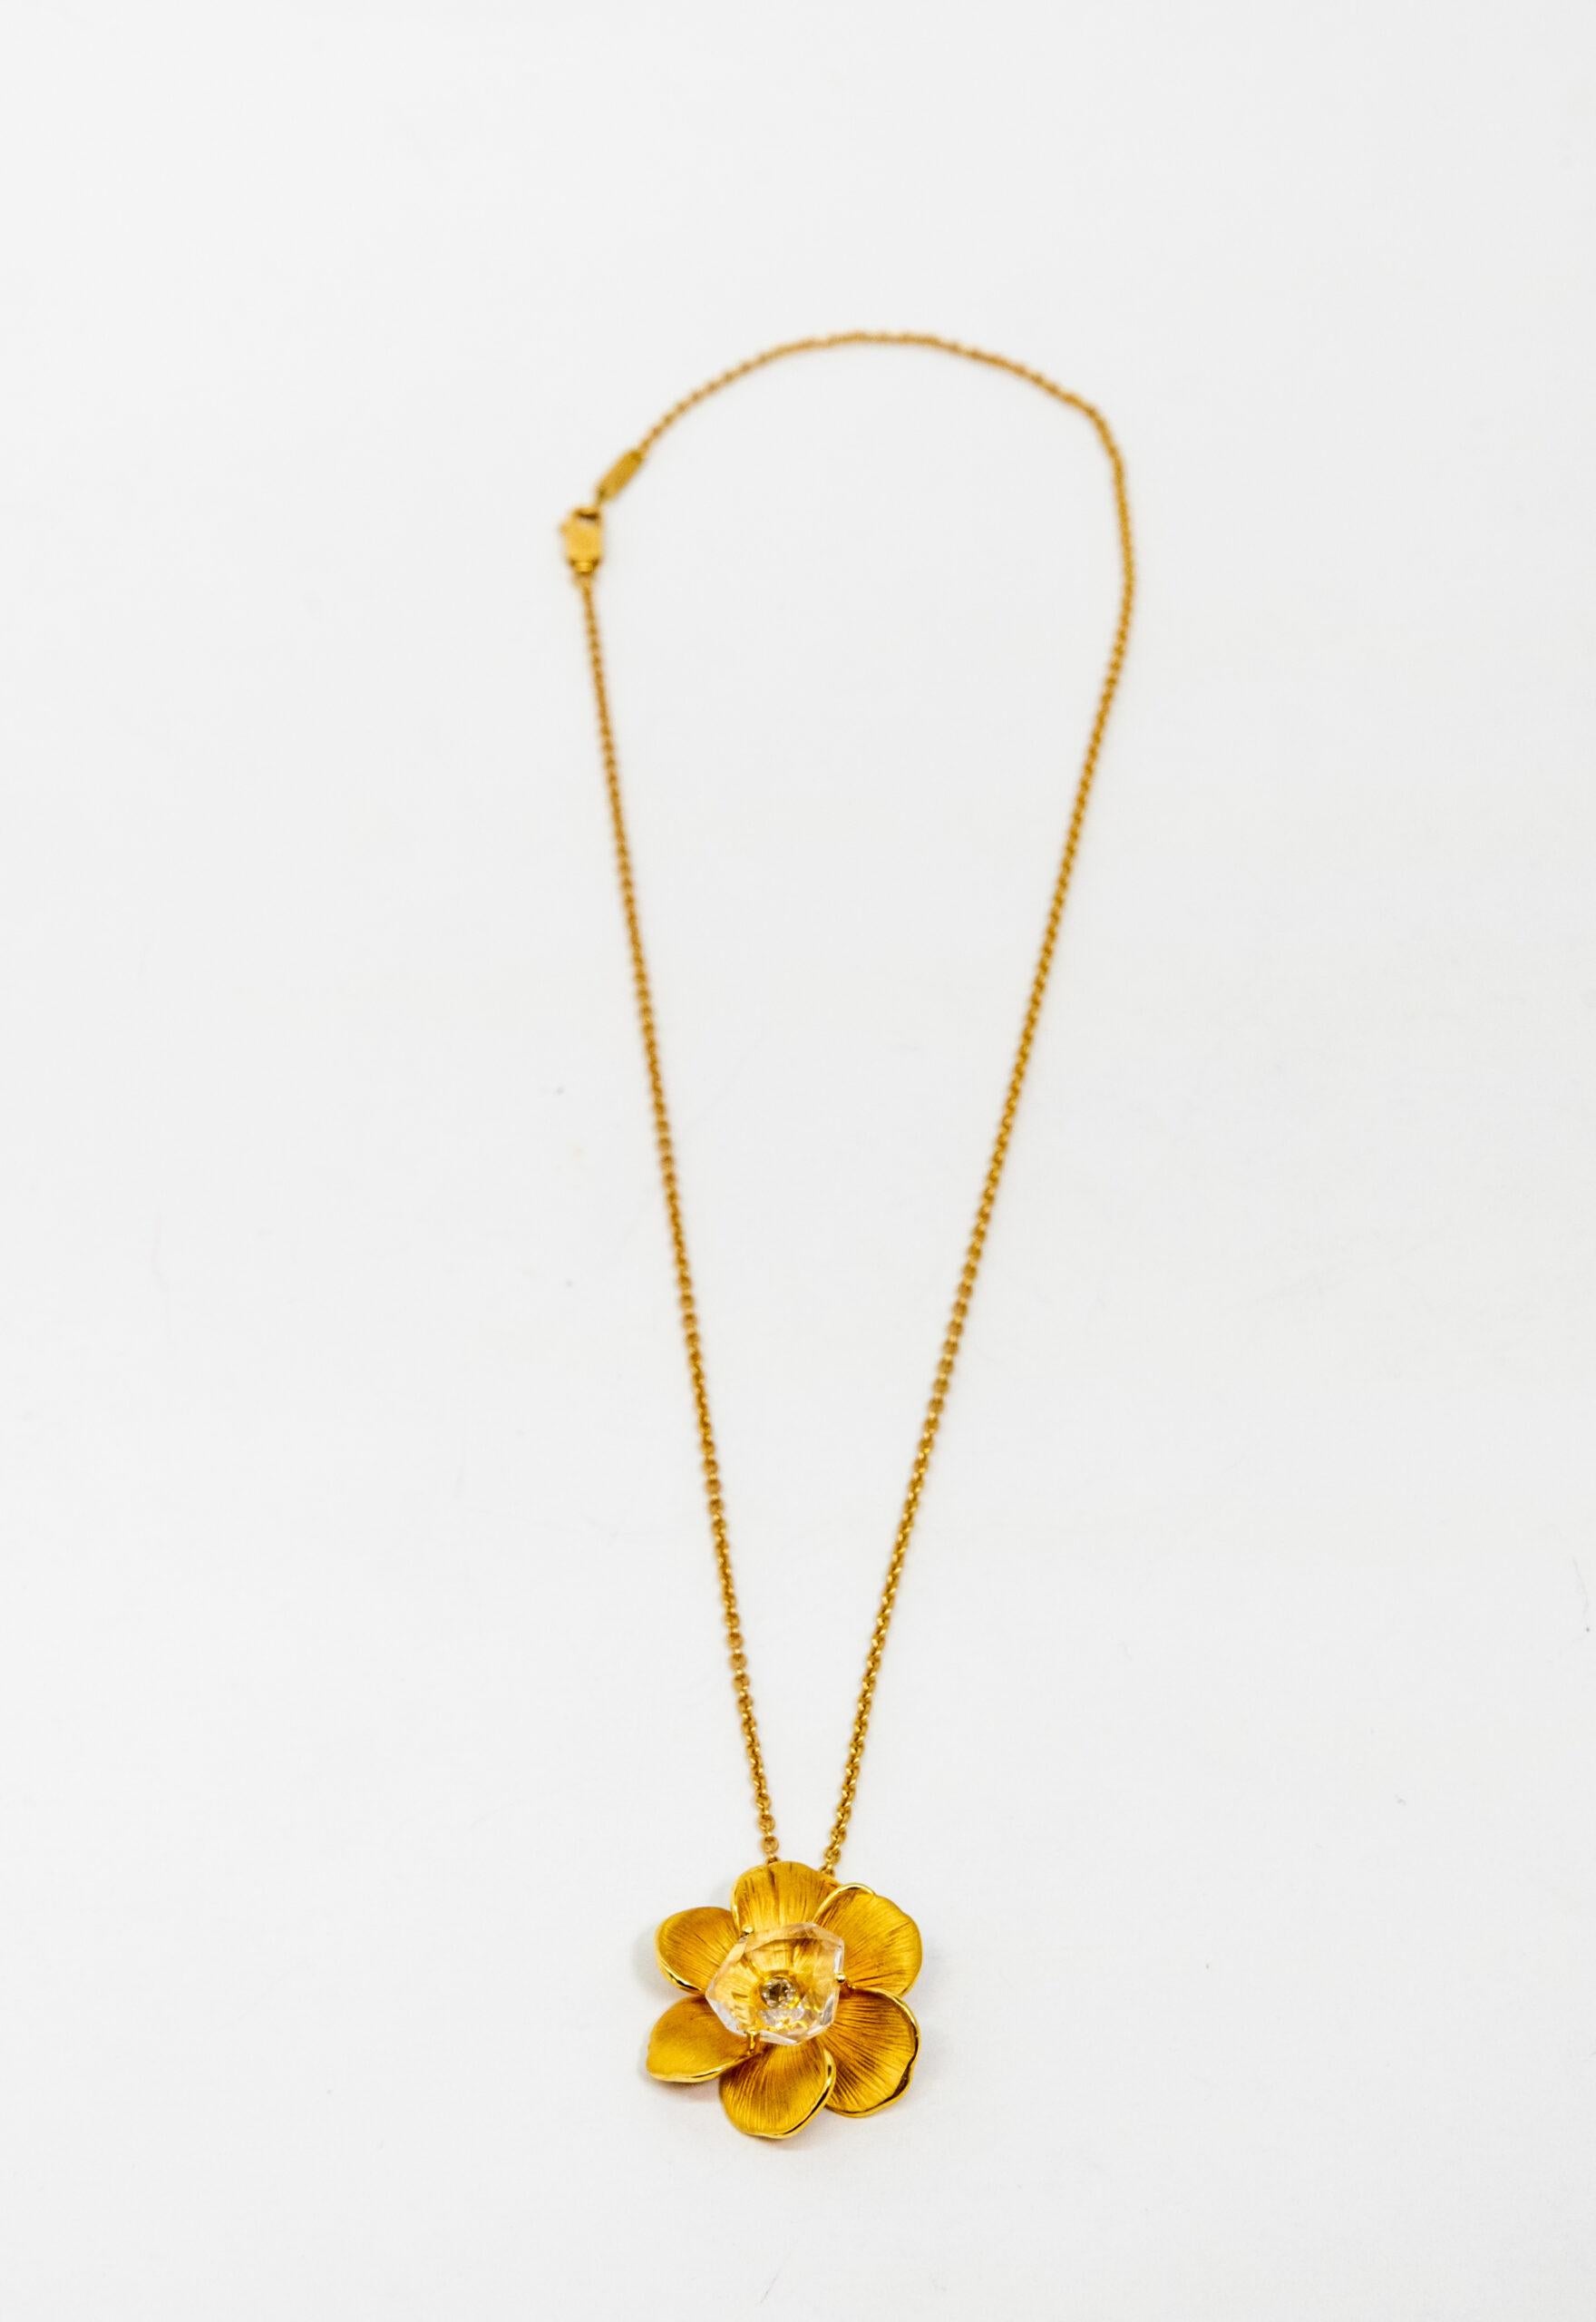 18K Yellow Gold pendant. 18K Yellow Gold Rolo chain with lobster claw lock. The floral yellow gold pendant is decorated with diamond (~0.07ct) which is covered by crystal rock (~1.00un)

Length: 24 cm